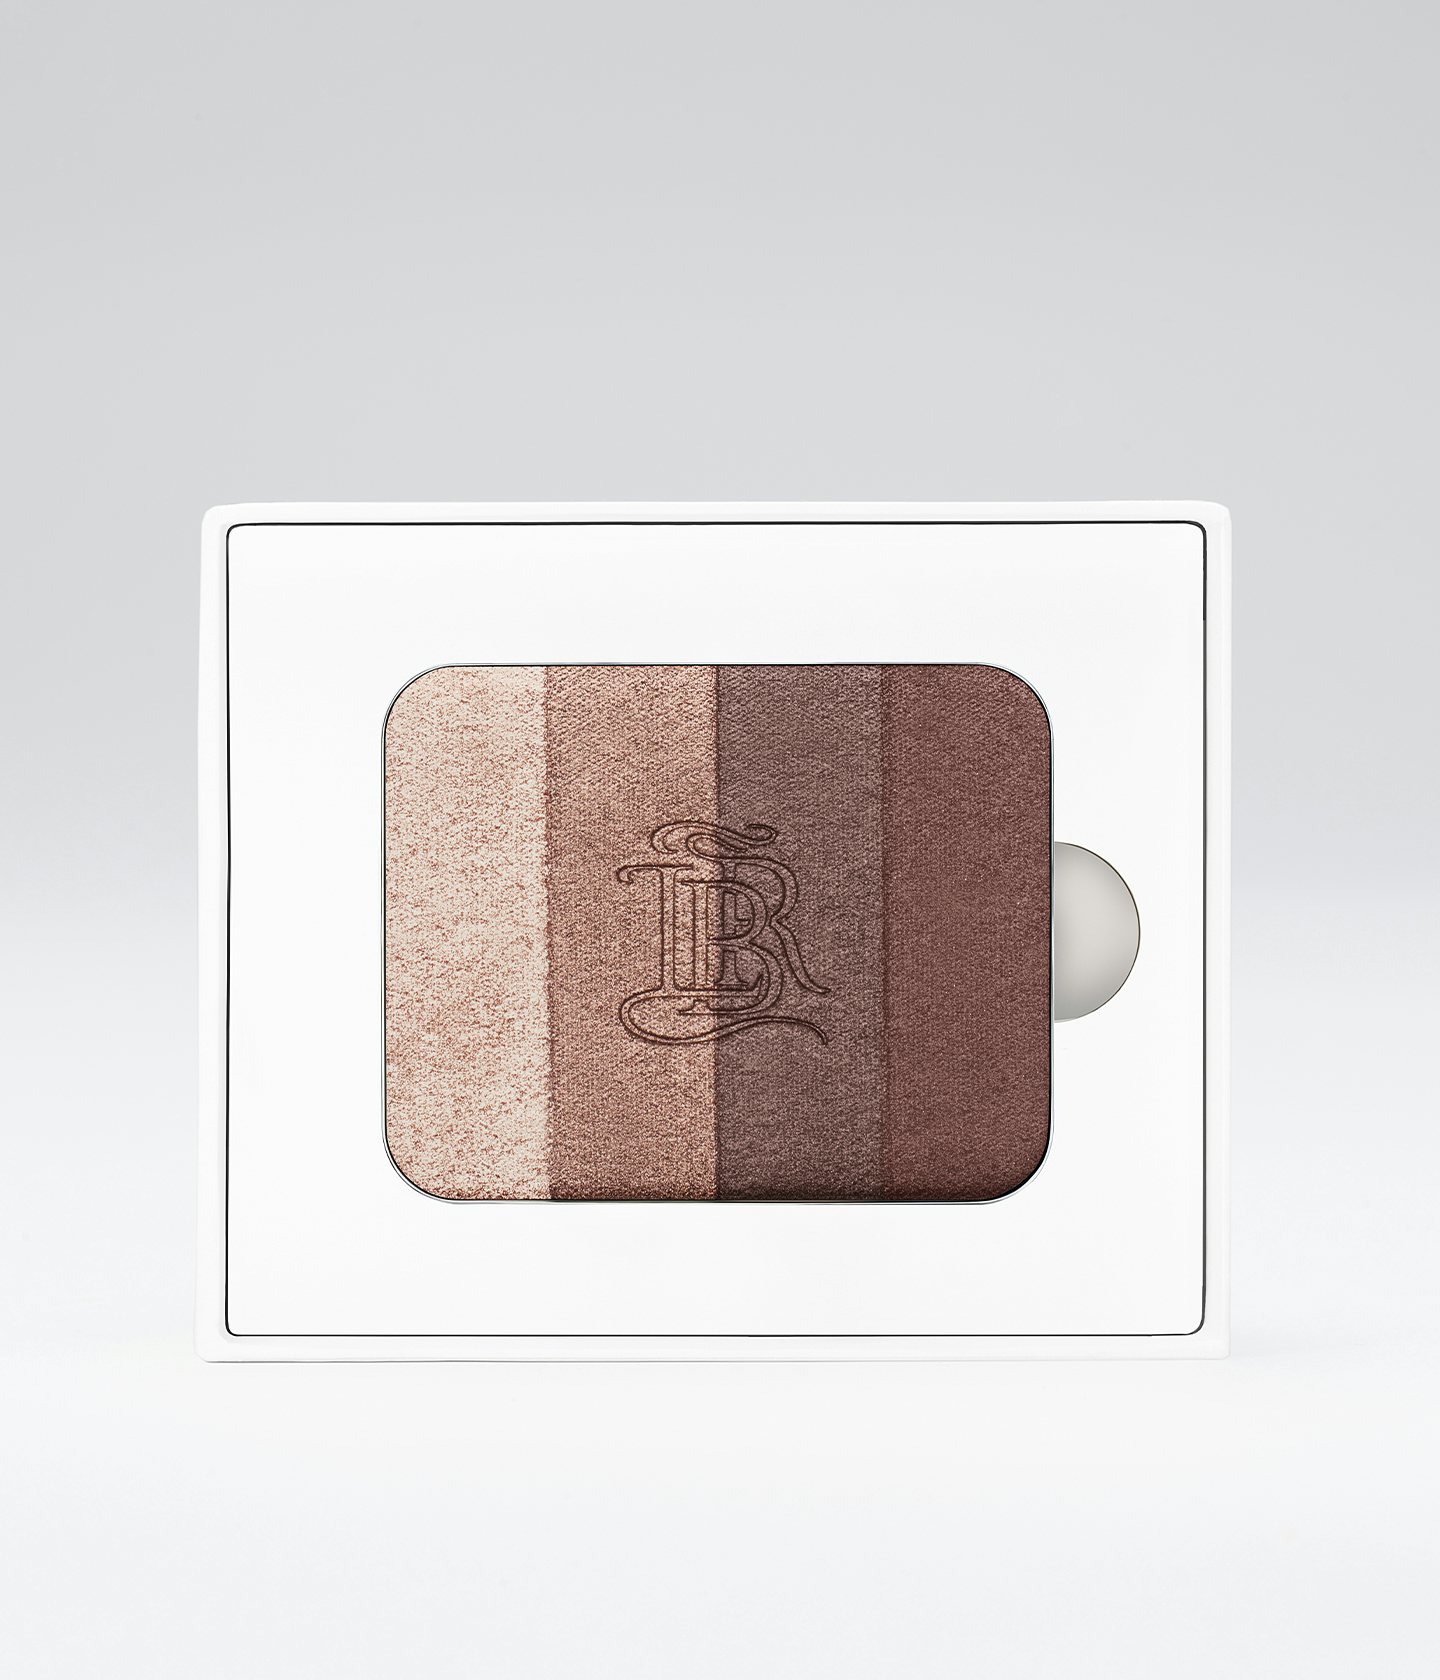 La bouche rouge les Ombres Aral eyeshadow palette in the white paper case